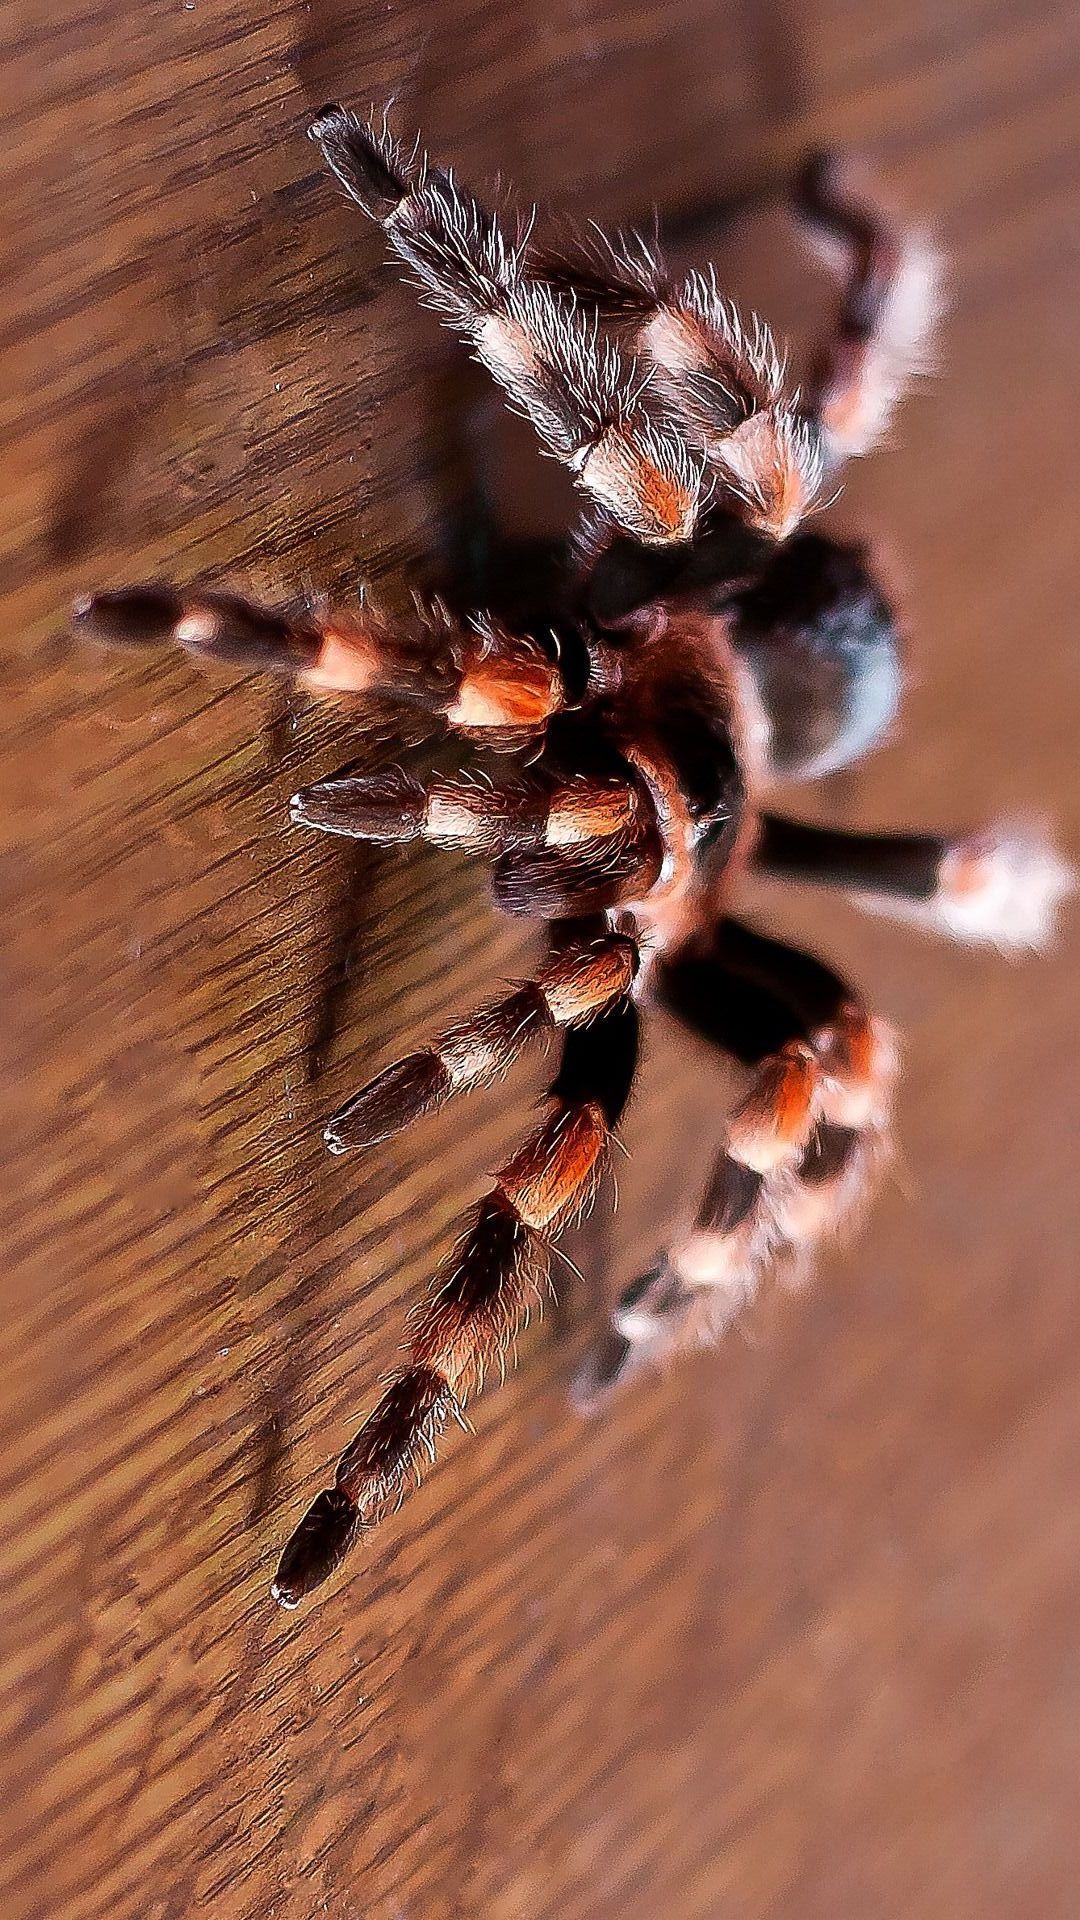 Scary Spider Wallpaper Iphone - HD Wallpaper 